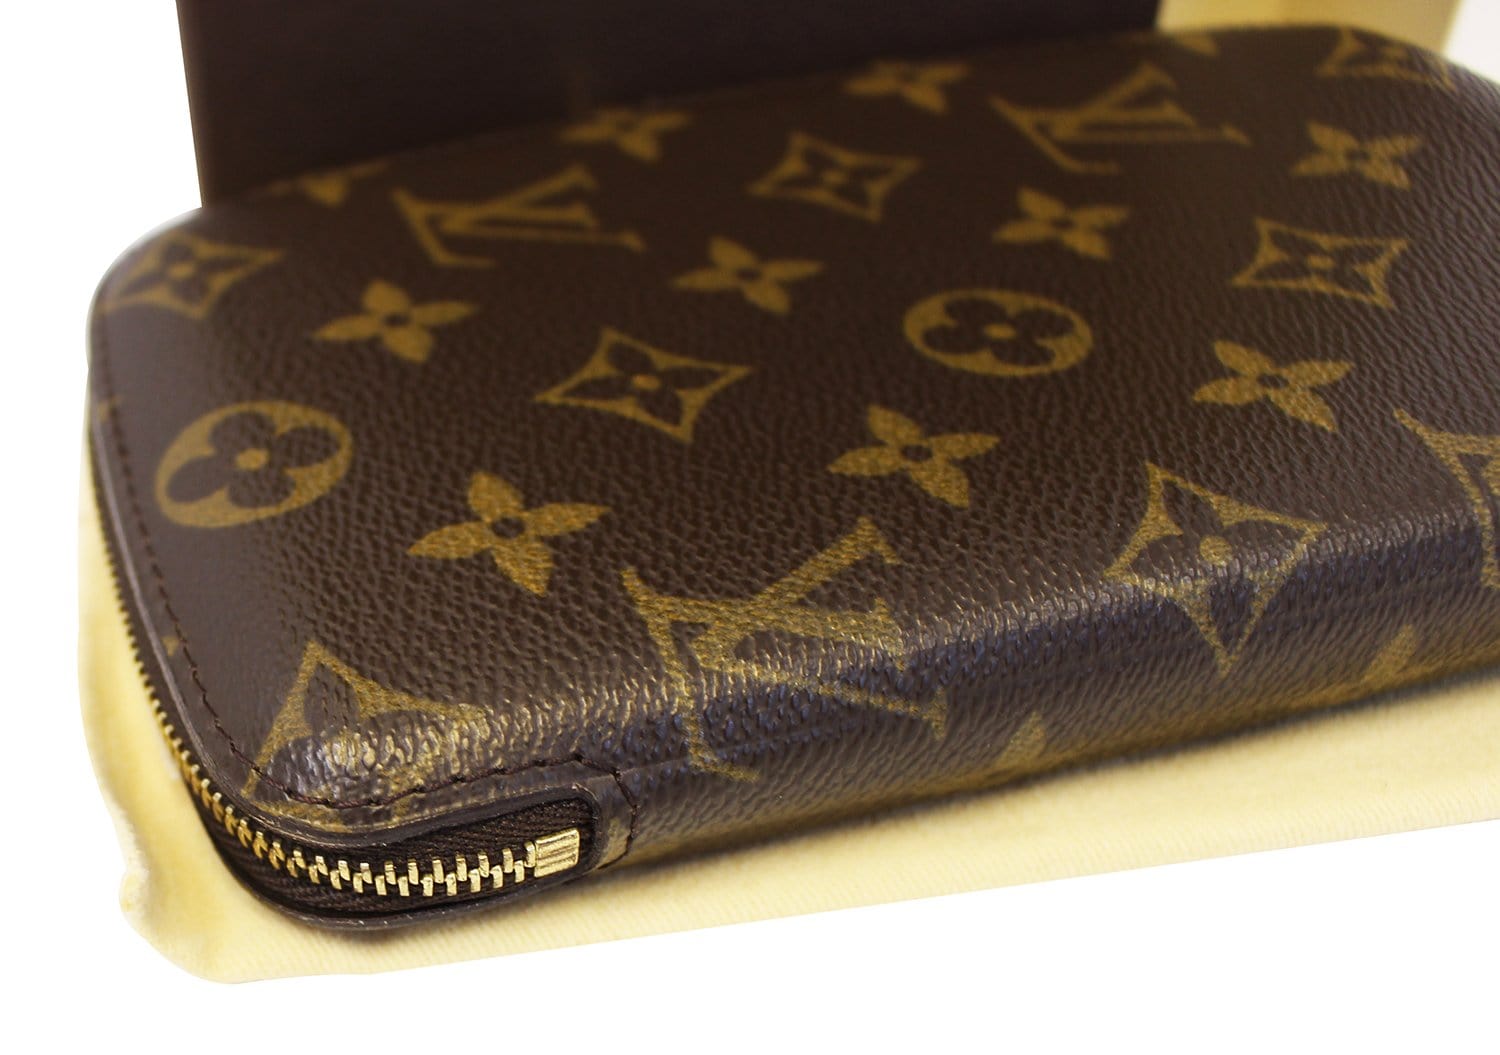 ⭐️Available ⭐️ LV monogram compact zippy wallet. Some fading